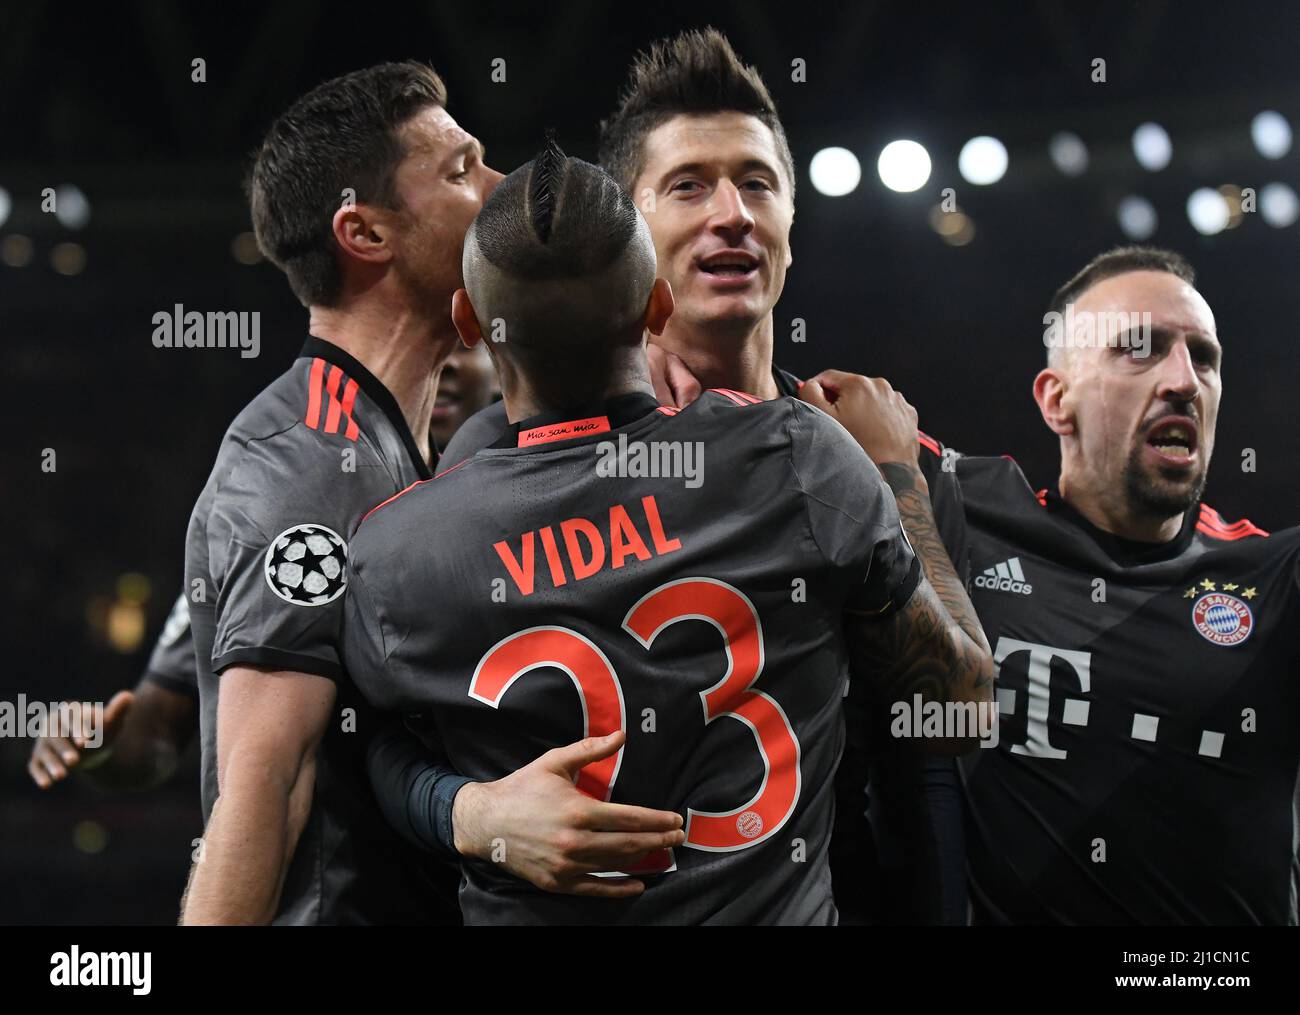 LONDON, ENGLAND - MARCH 7, 2017: Arturo Vidal, Franck Ribery and Xabi Alonso celebrate with Robert Lewandowski (C) after he scored a goal during the second leg of the UEFA Champions League Round of 16 game between Arsenal FC and Bayern Munchen at Emirates Stadium. Copyright: Cosmin Iftode/Picstaff Stock Photo